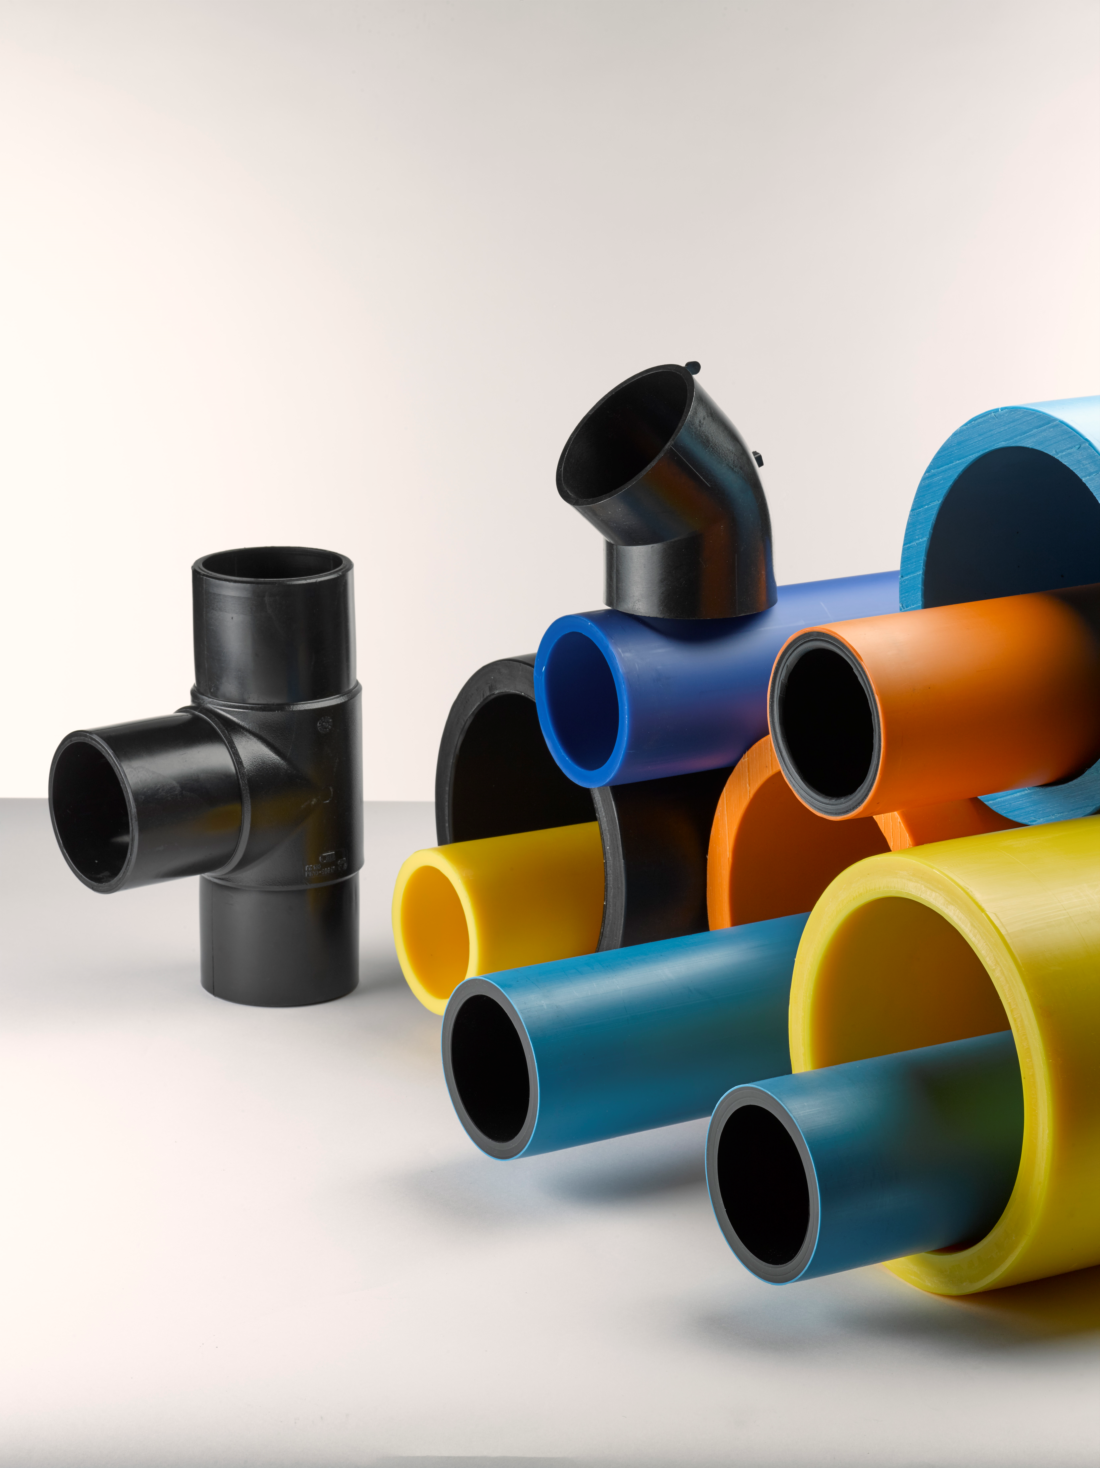 Borealis and Borouge polyolefin pipe solutions are enabling life’s essentials